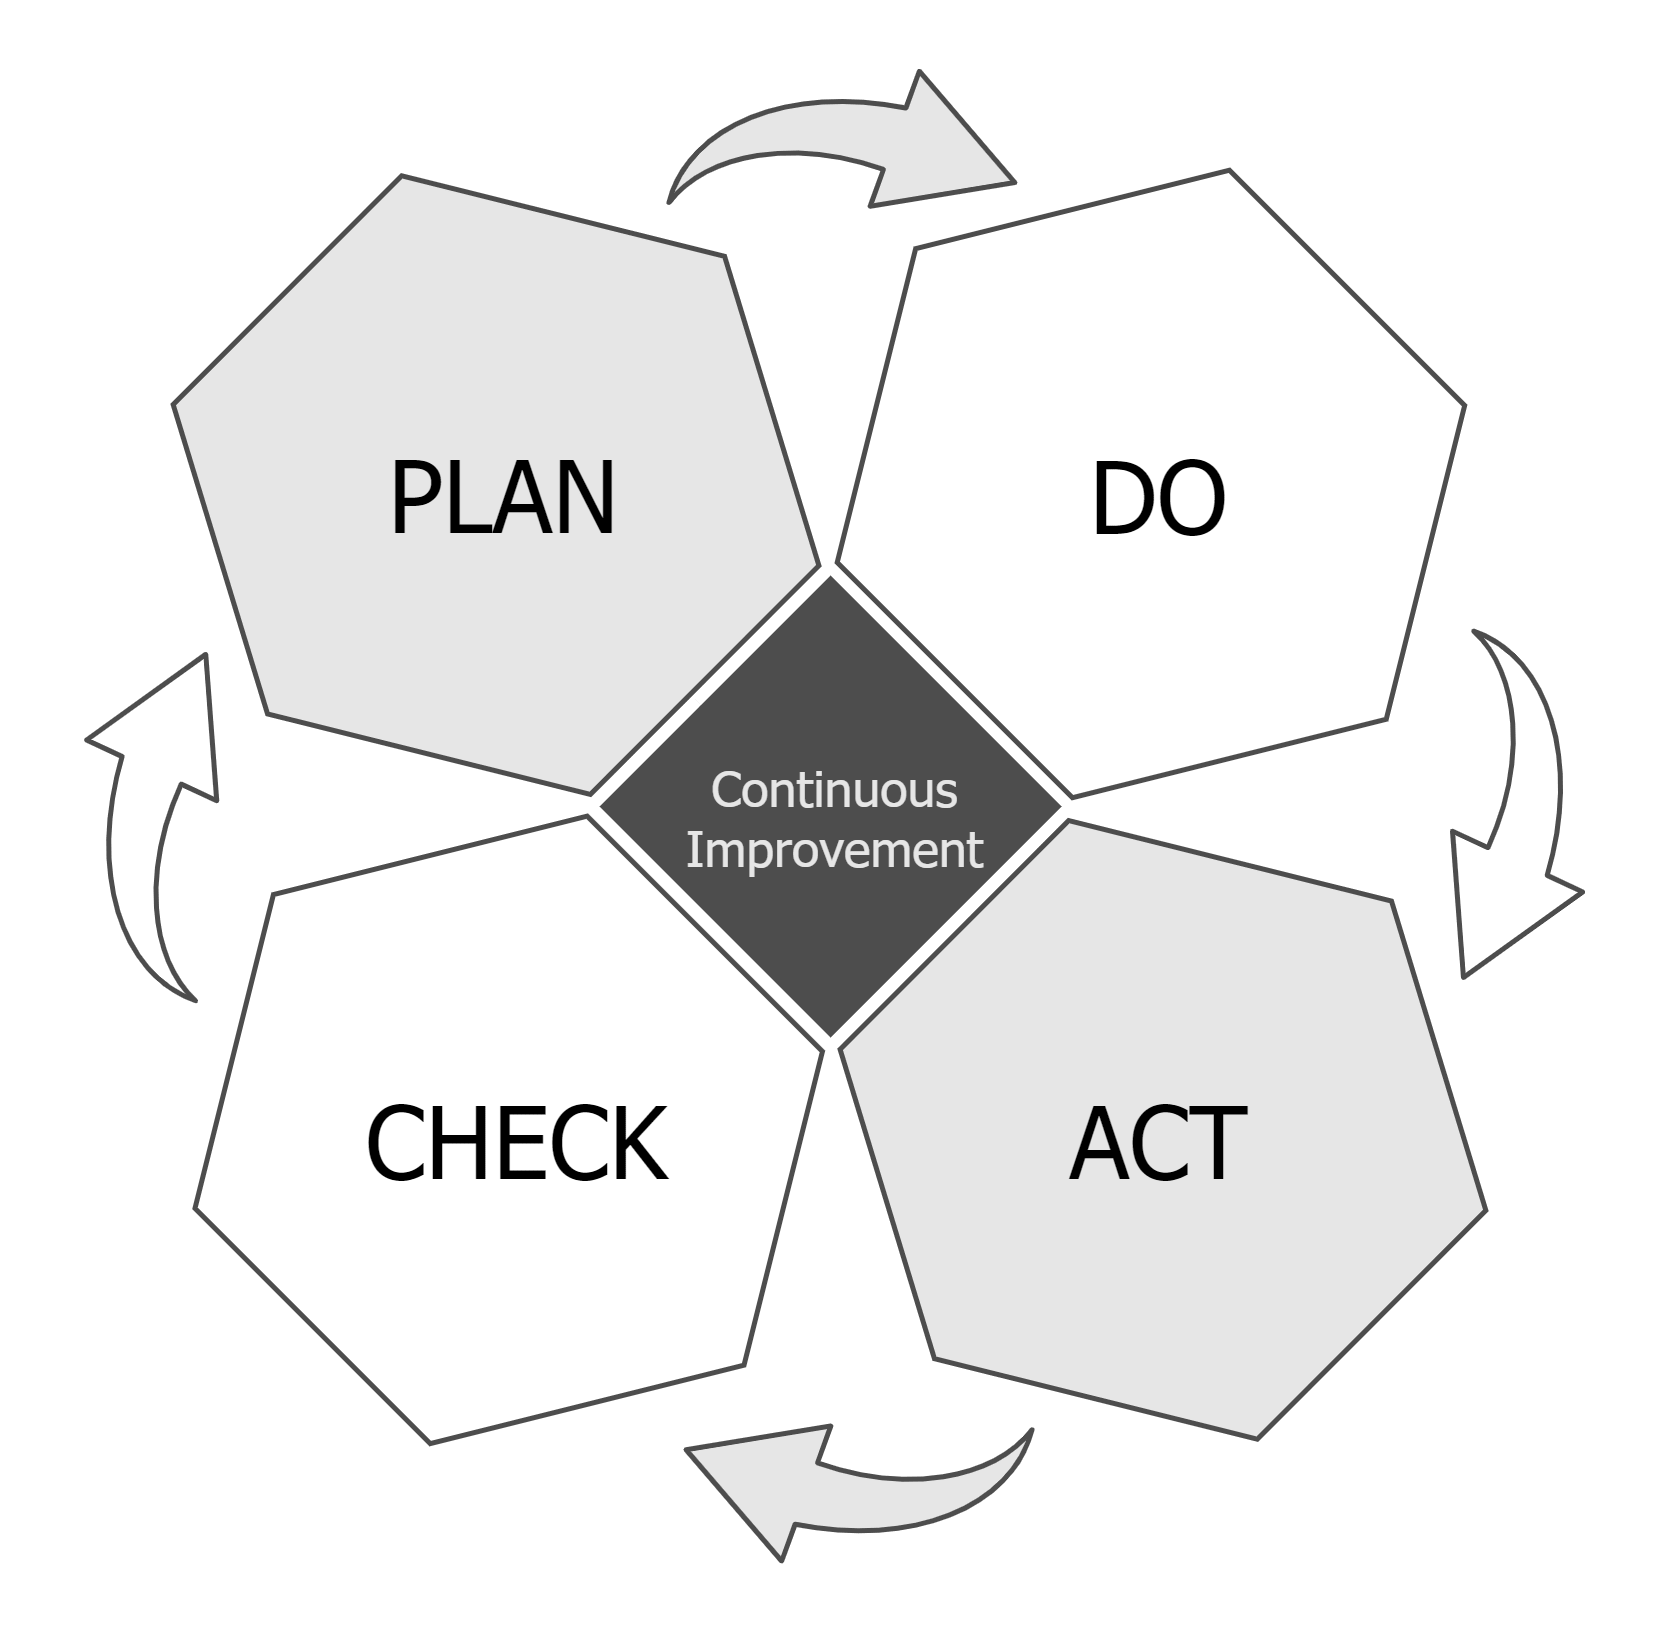 PDCA/ Deming cycle